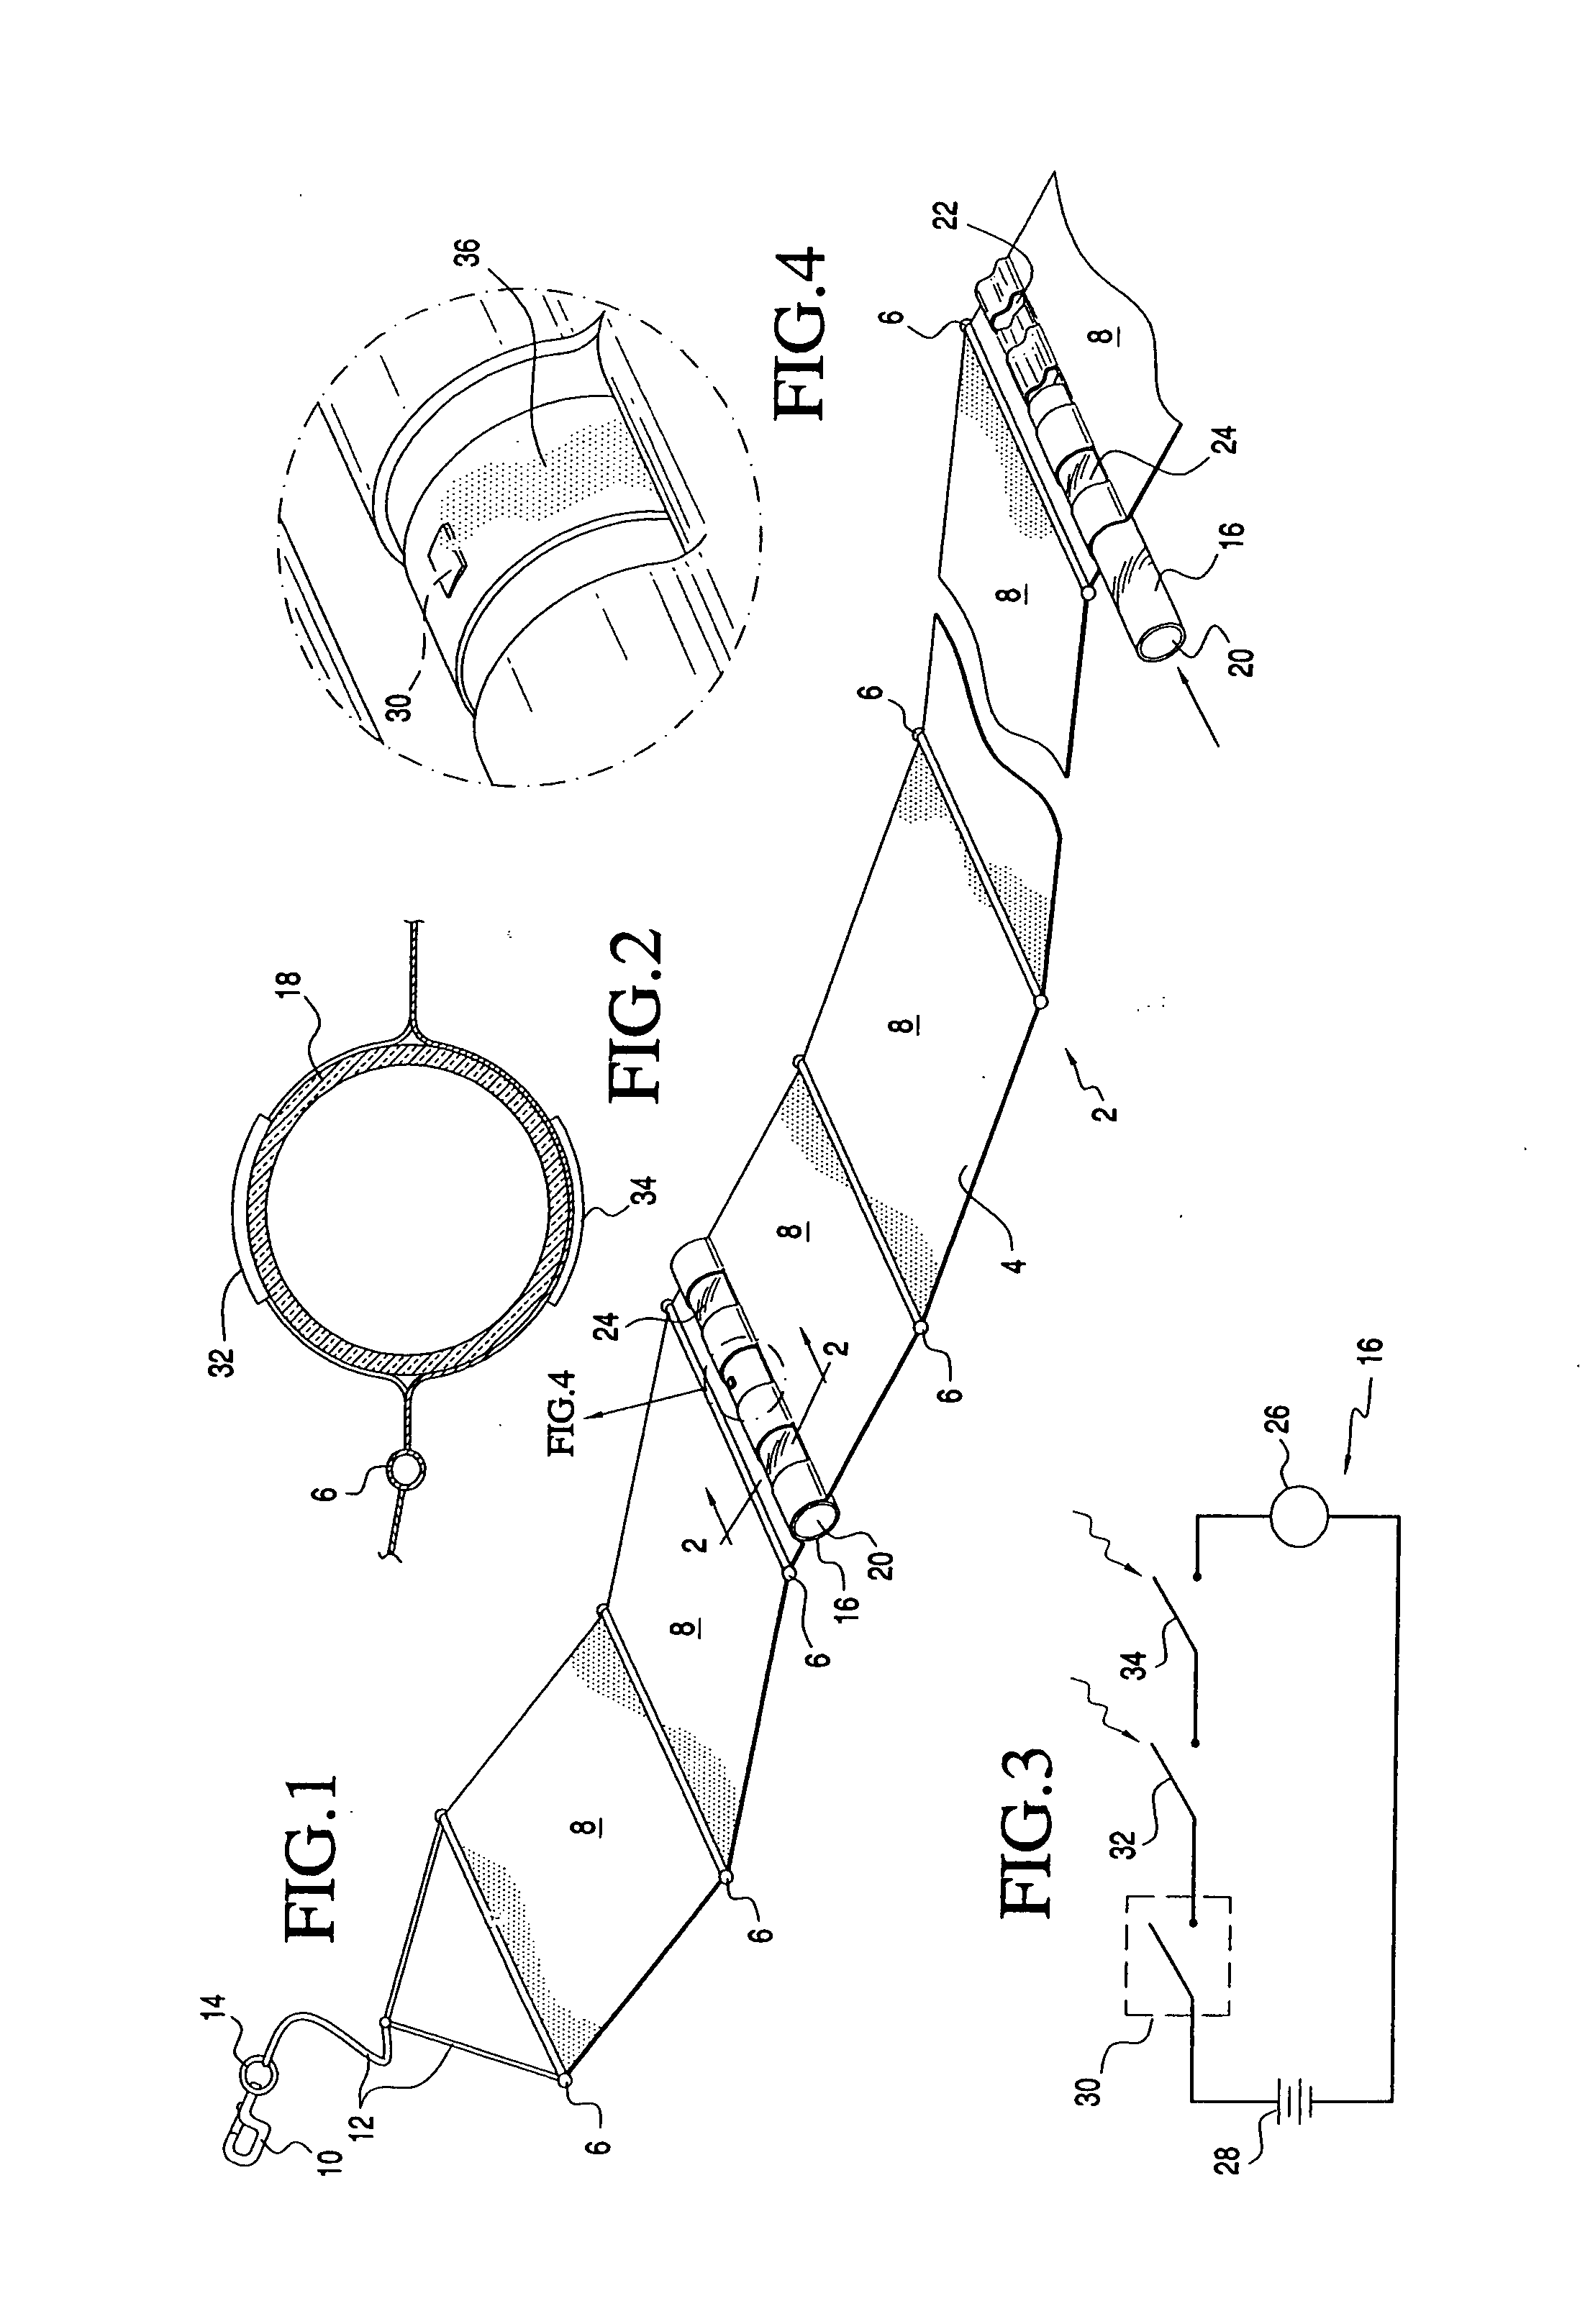 Water-activated and light-assisted visual locating device